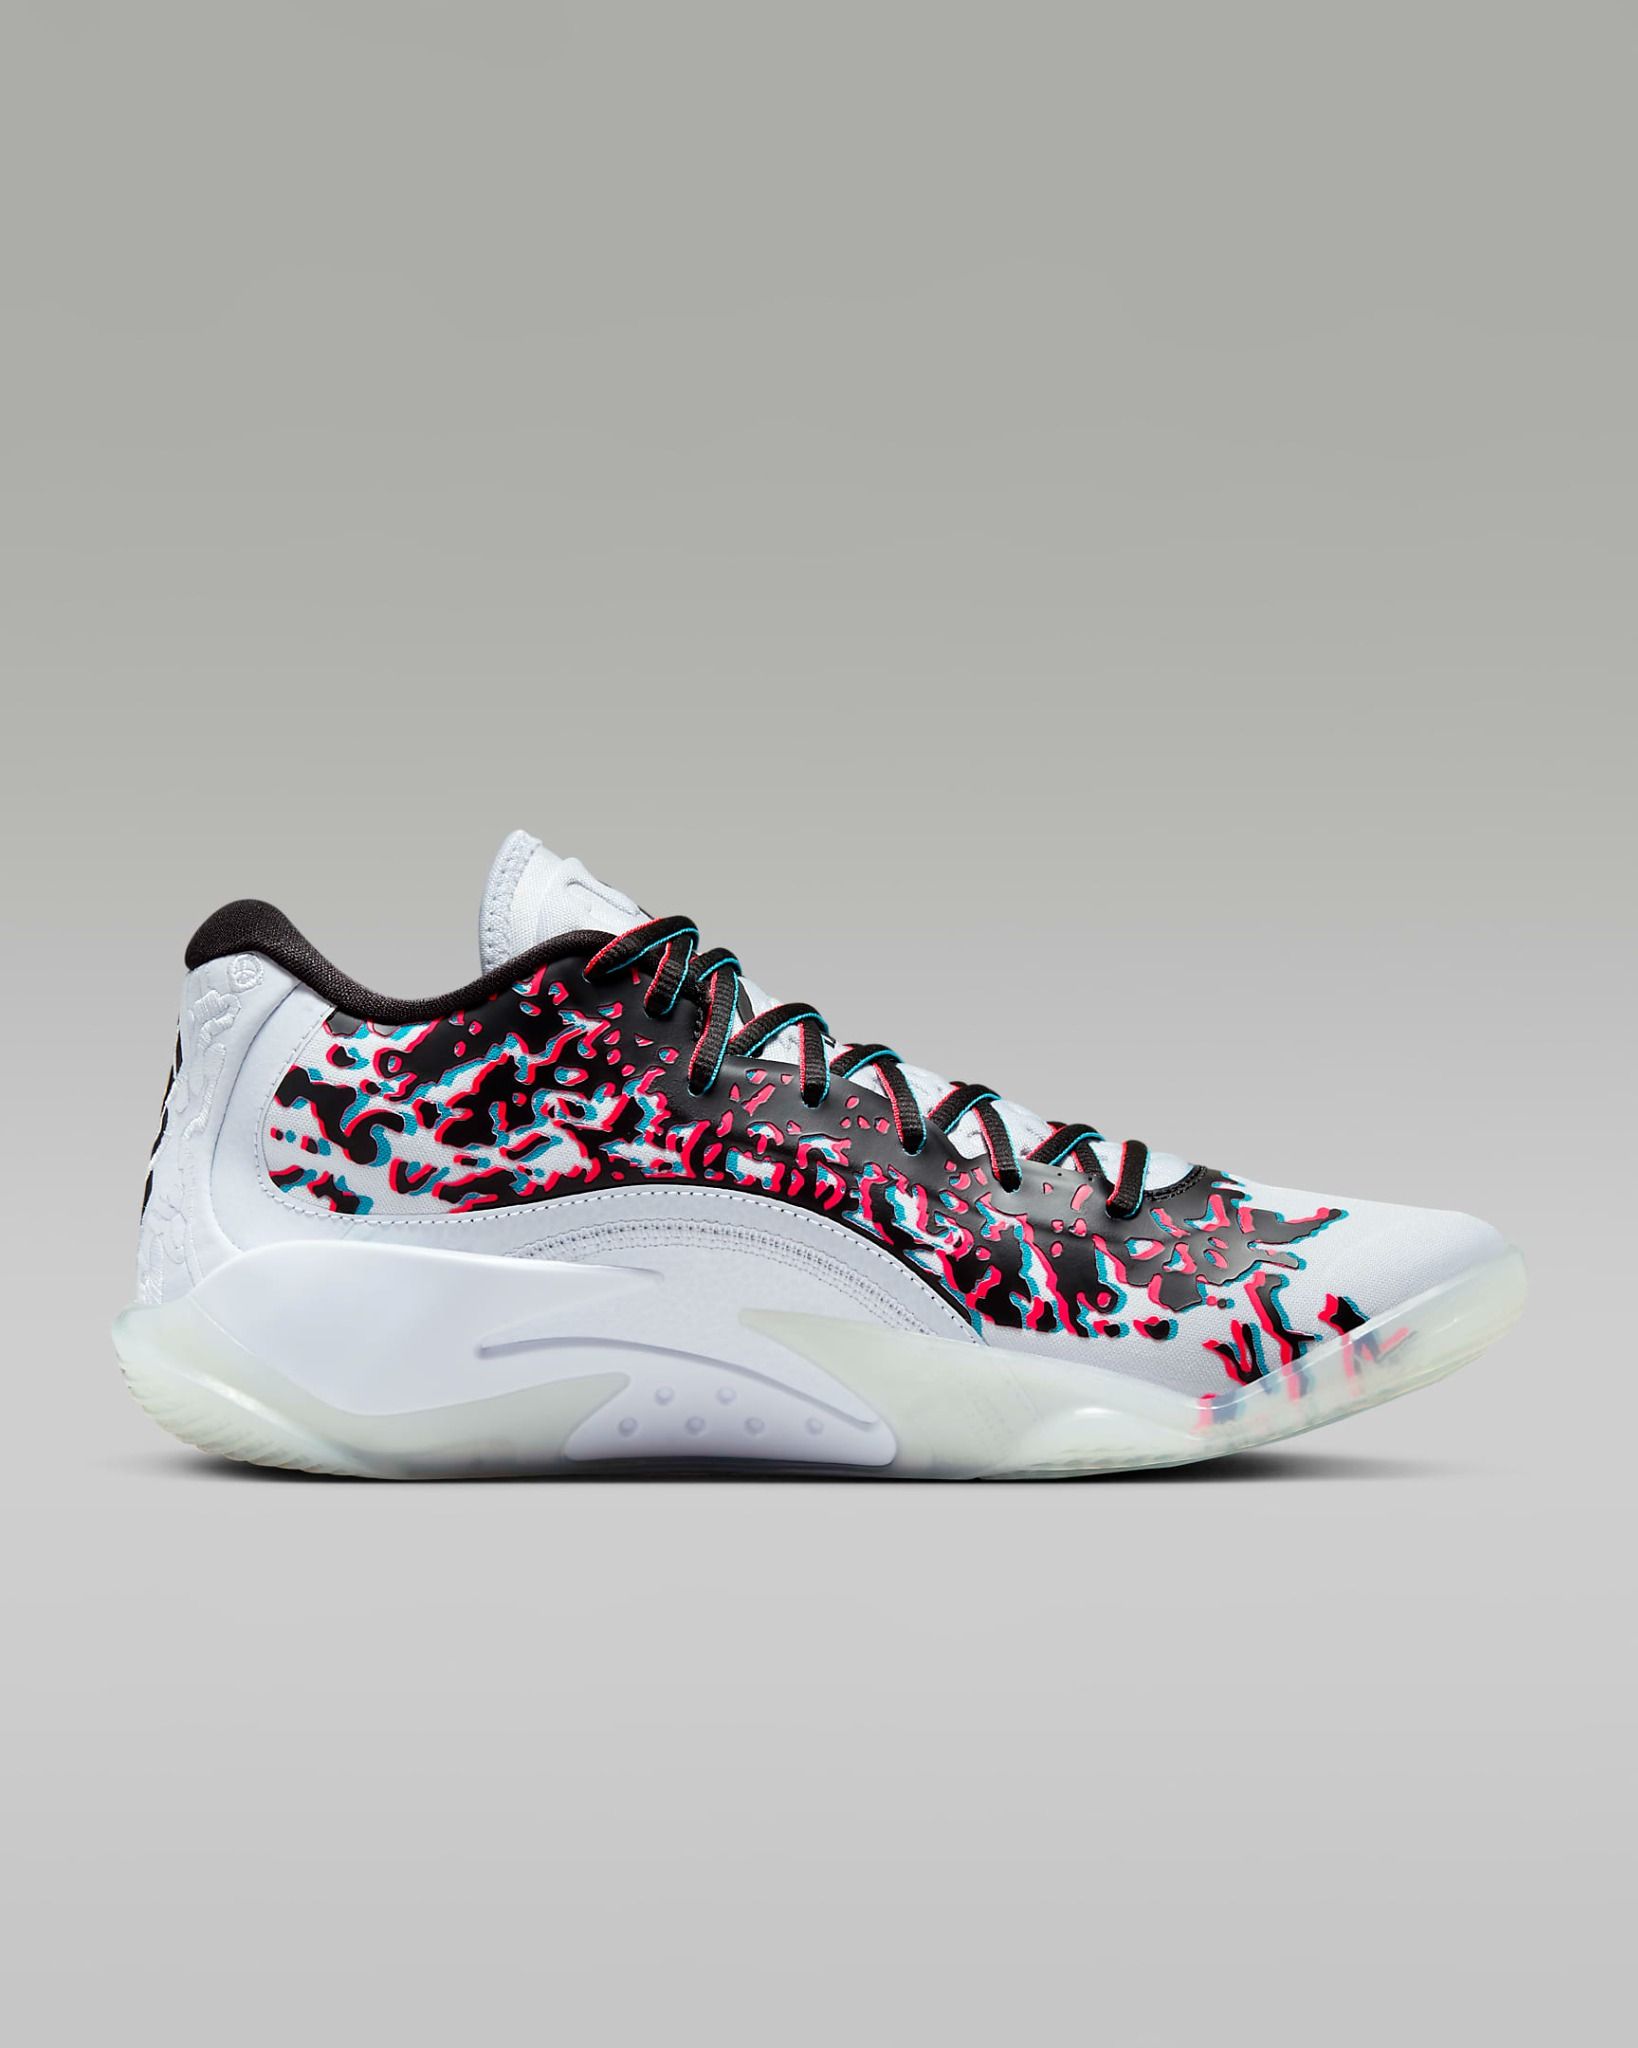 Nike - Giày thể thao Nam Zion 3 'Z-3D' PF Basketball Shoes